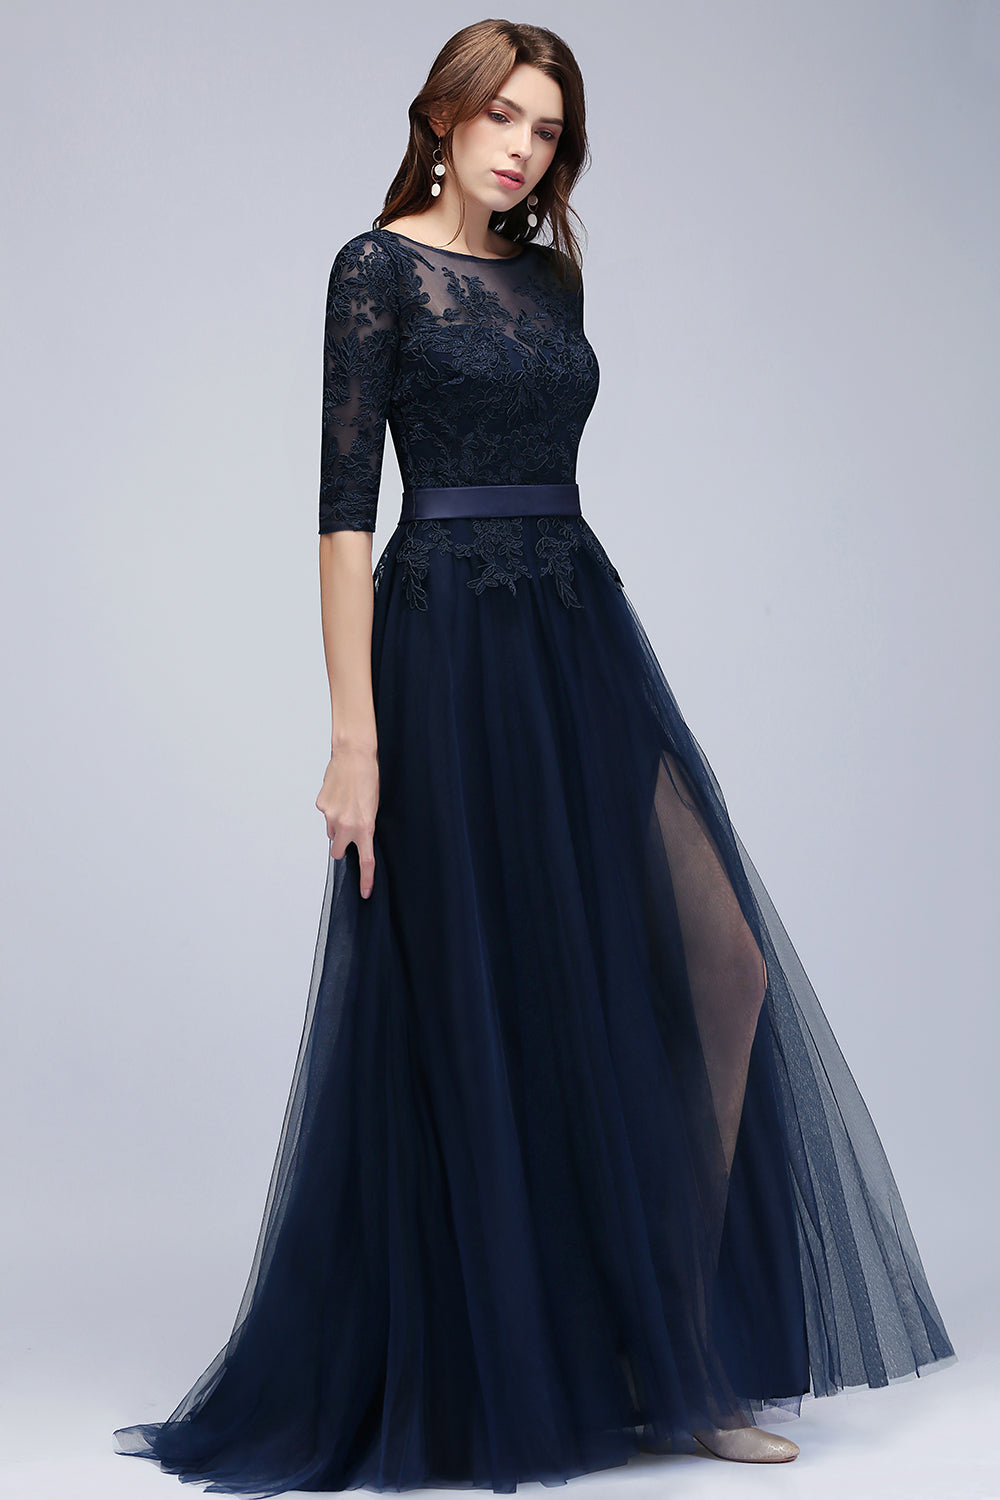 Elegant Half-Sleeves Lace Navy Bridesmaid Dresses with Appliques-27dress